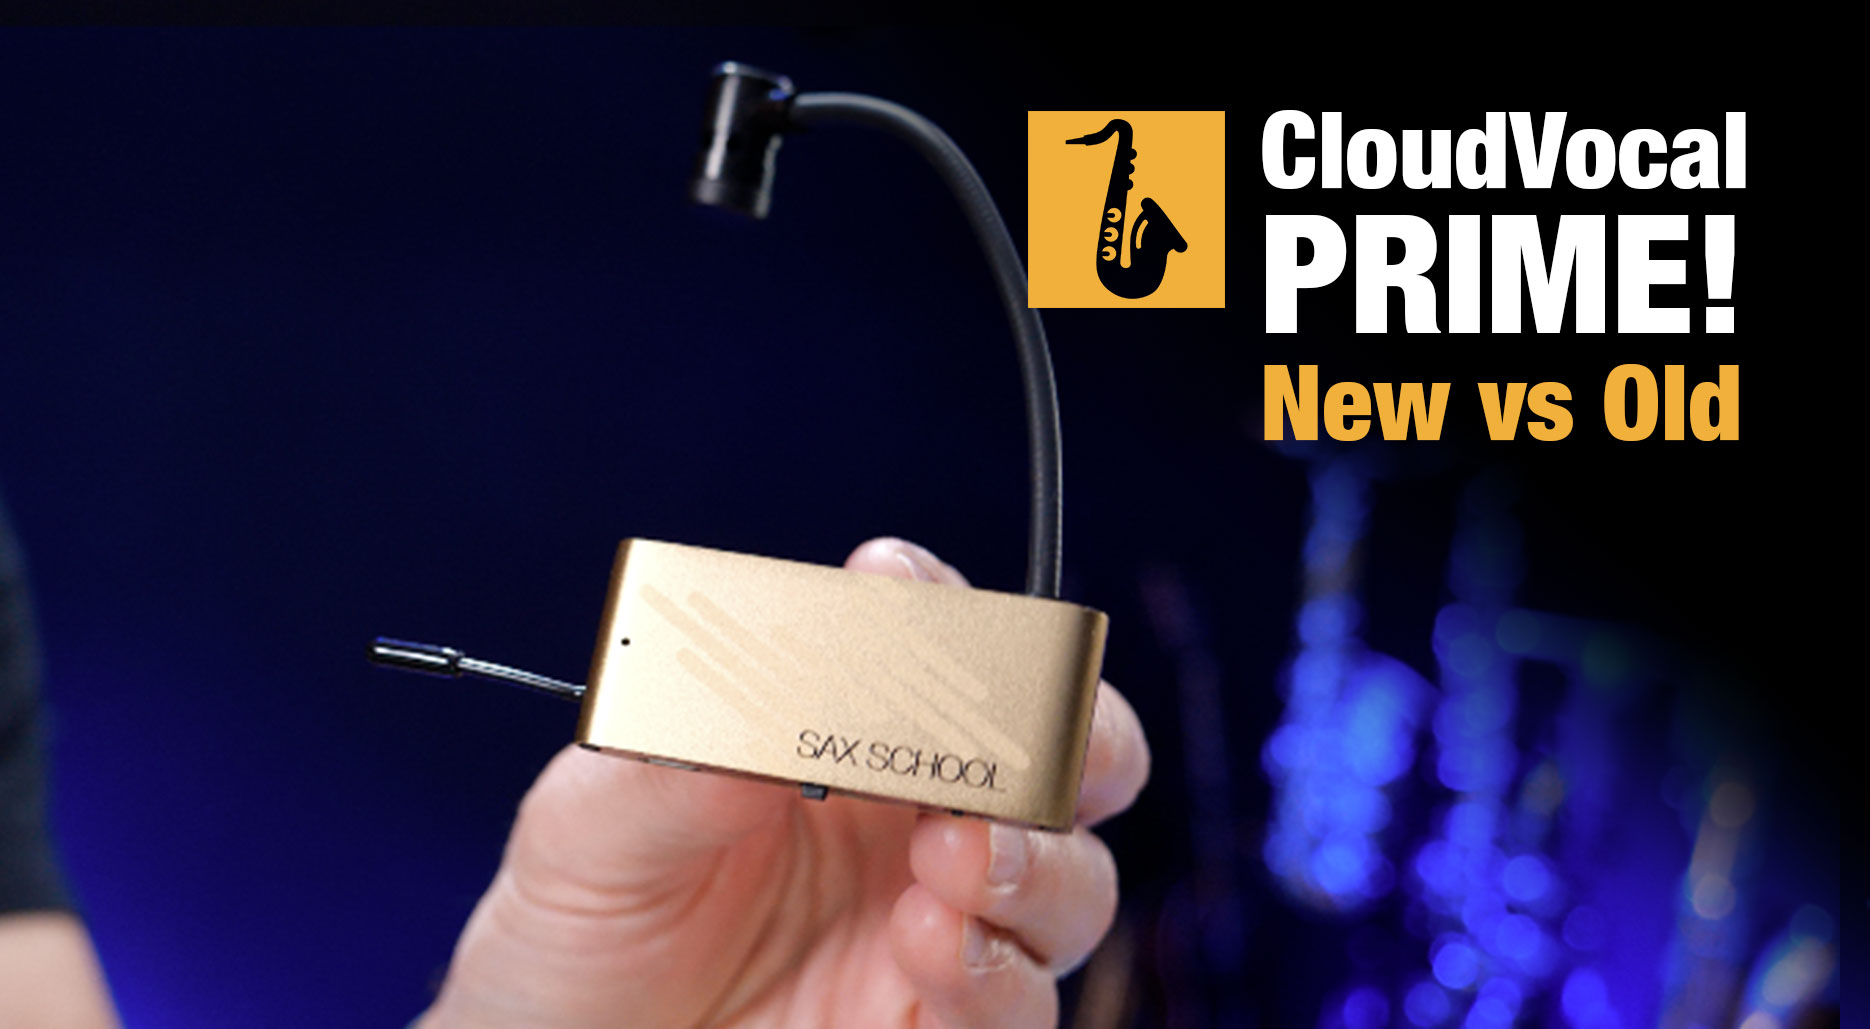 Cloudvocal Prime saxophone mic review from Sax School Online